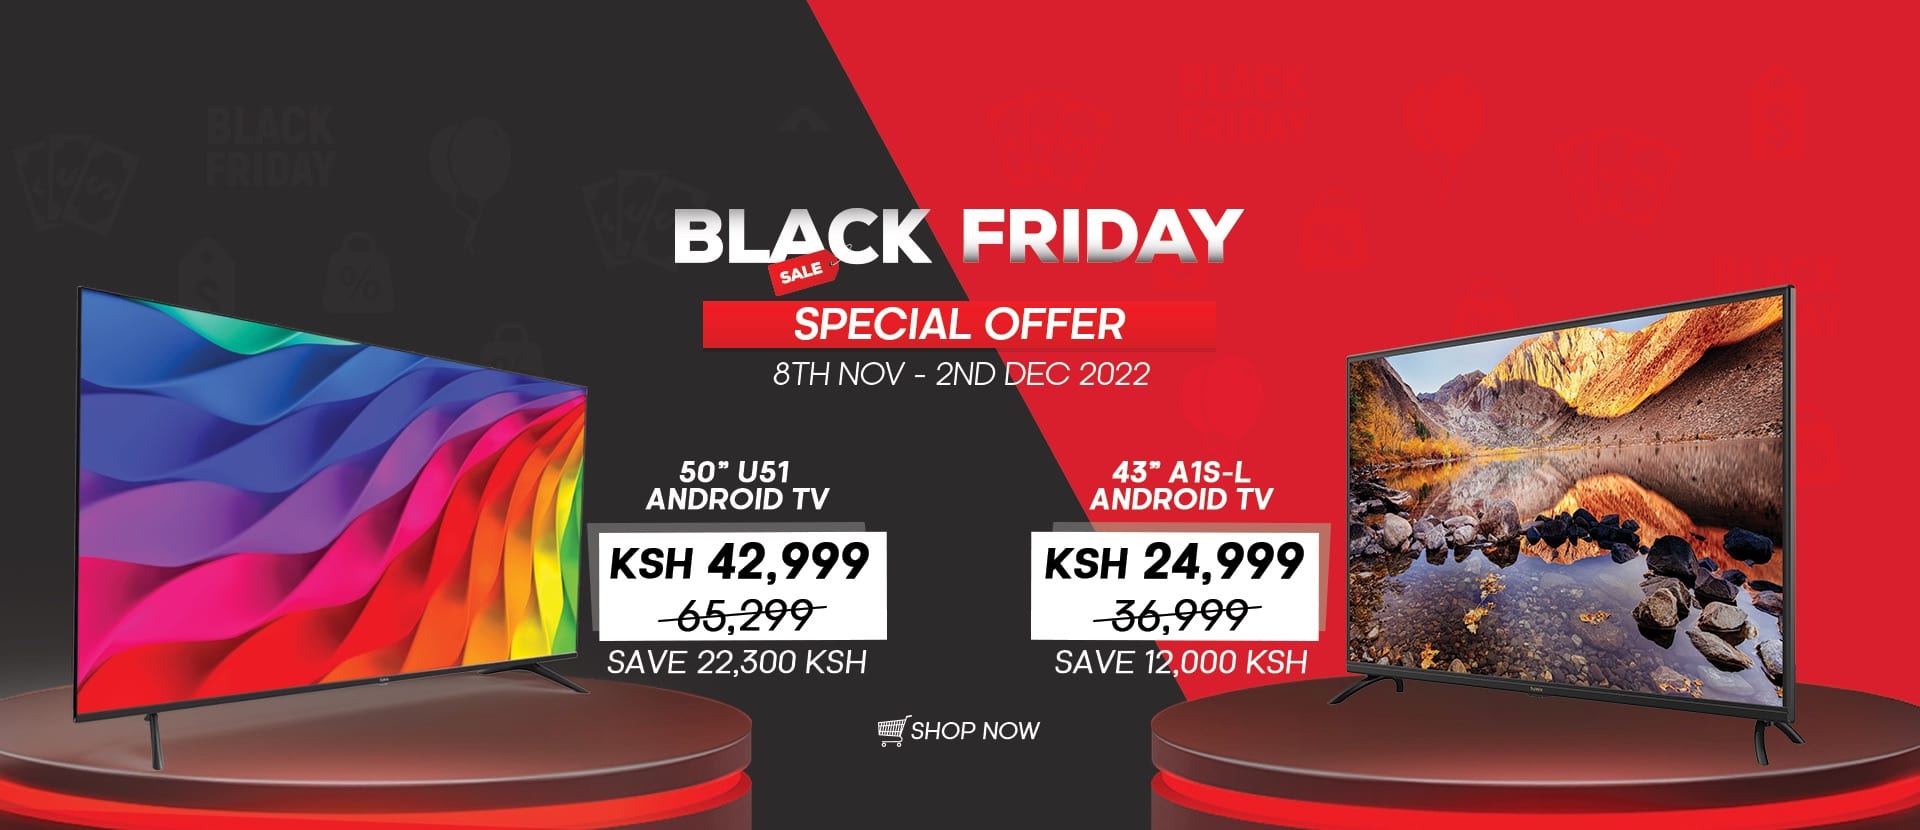 Syinix discounts TV prices by up to 50% for Black Friday